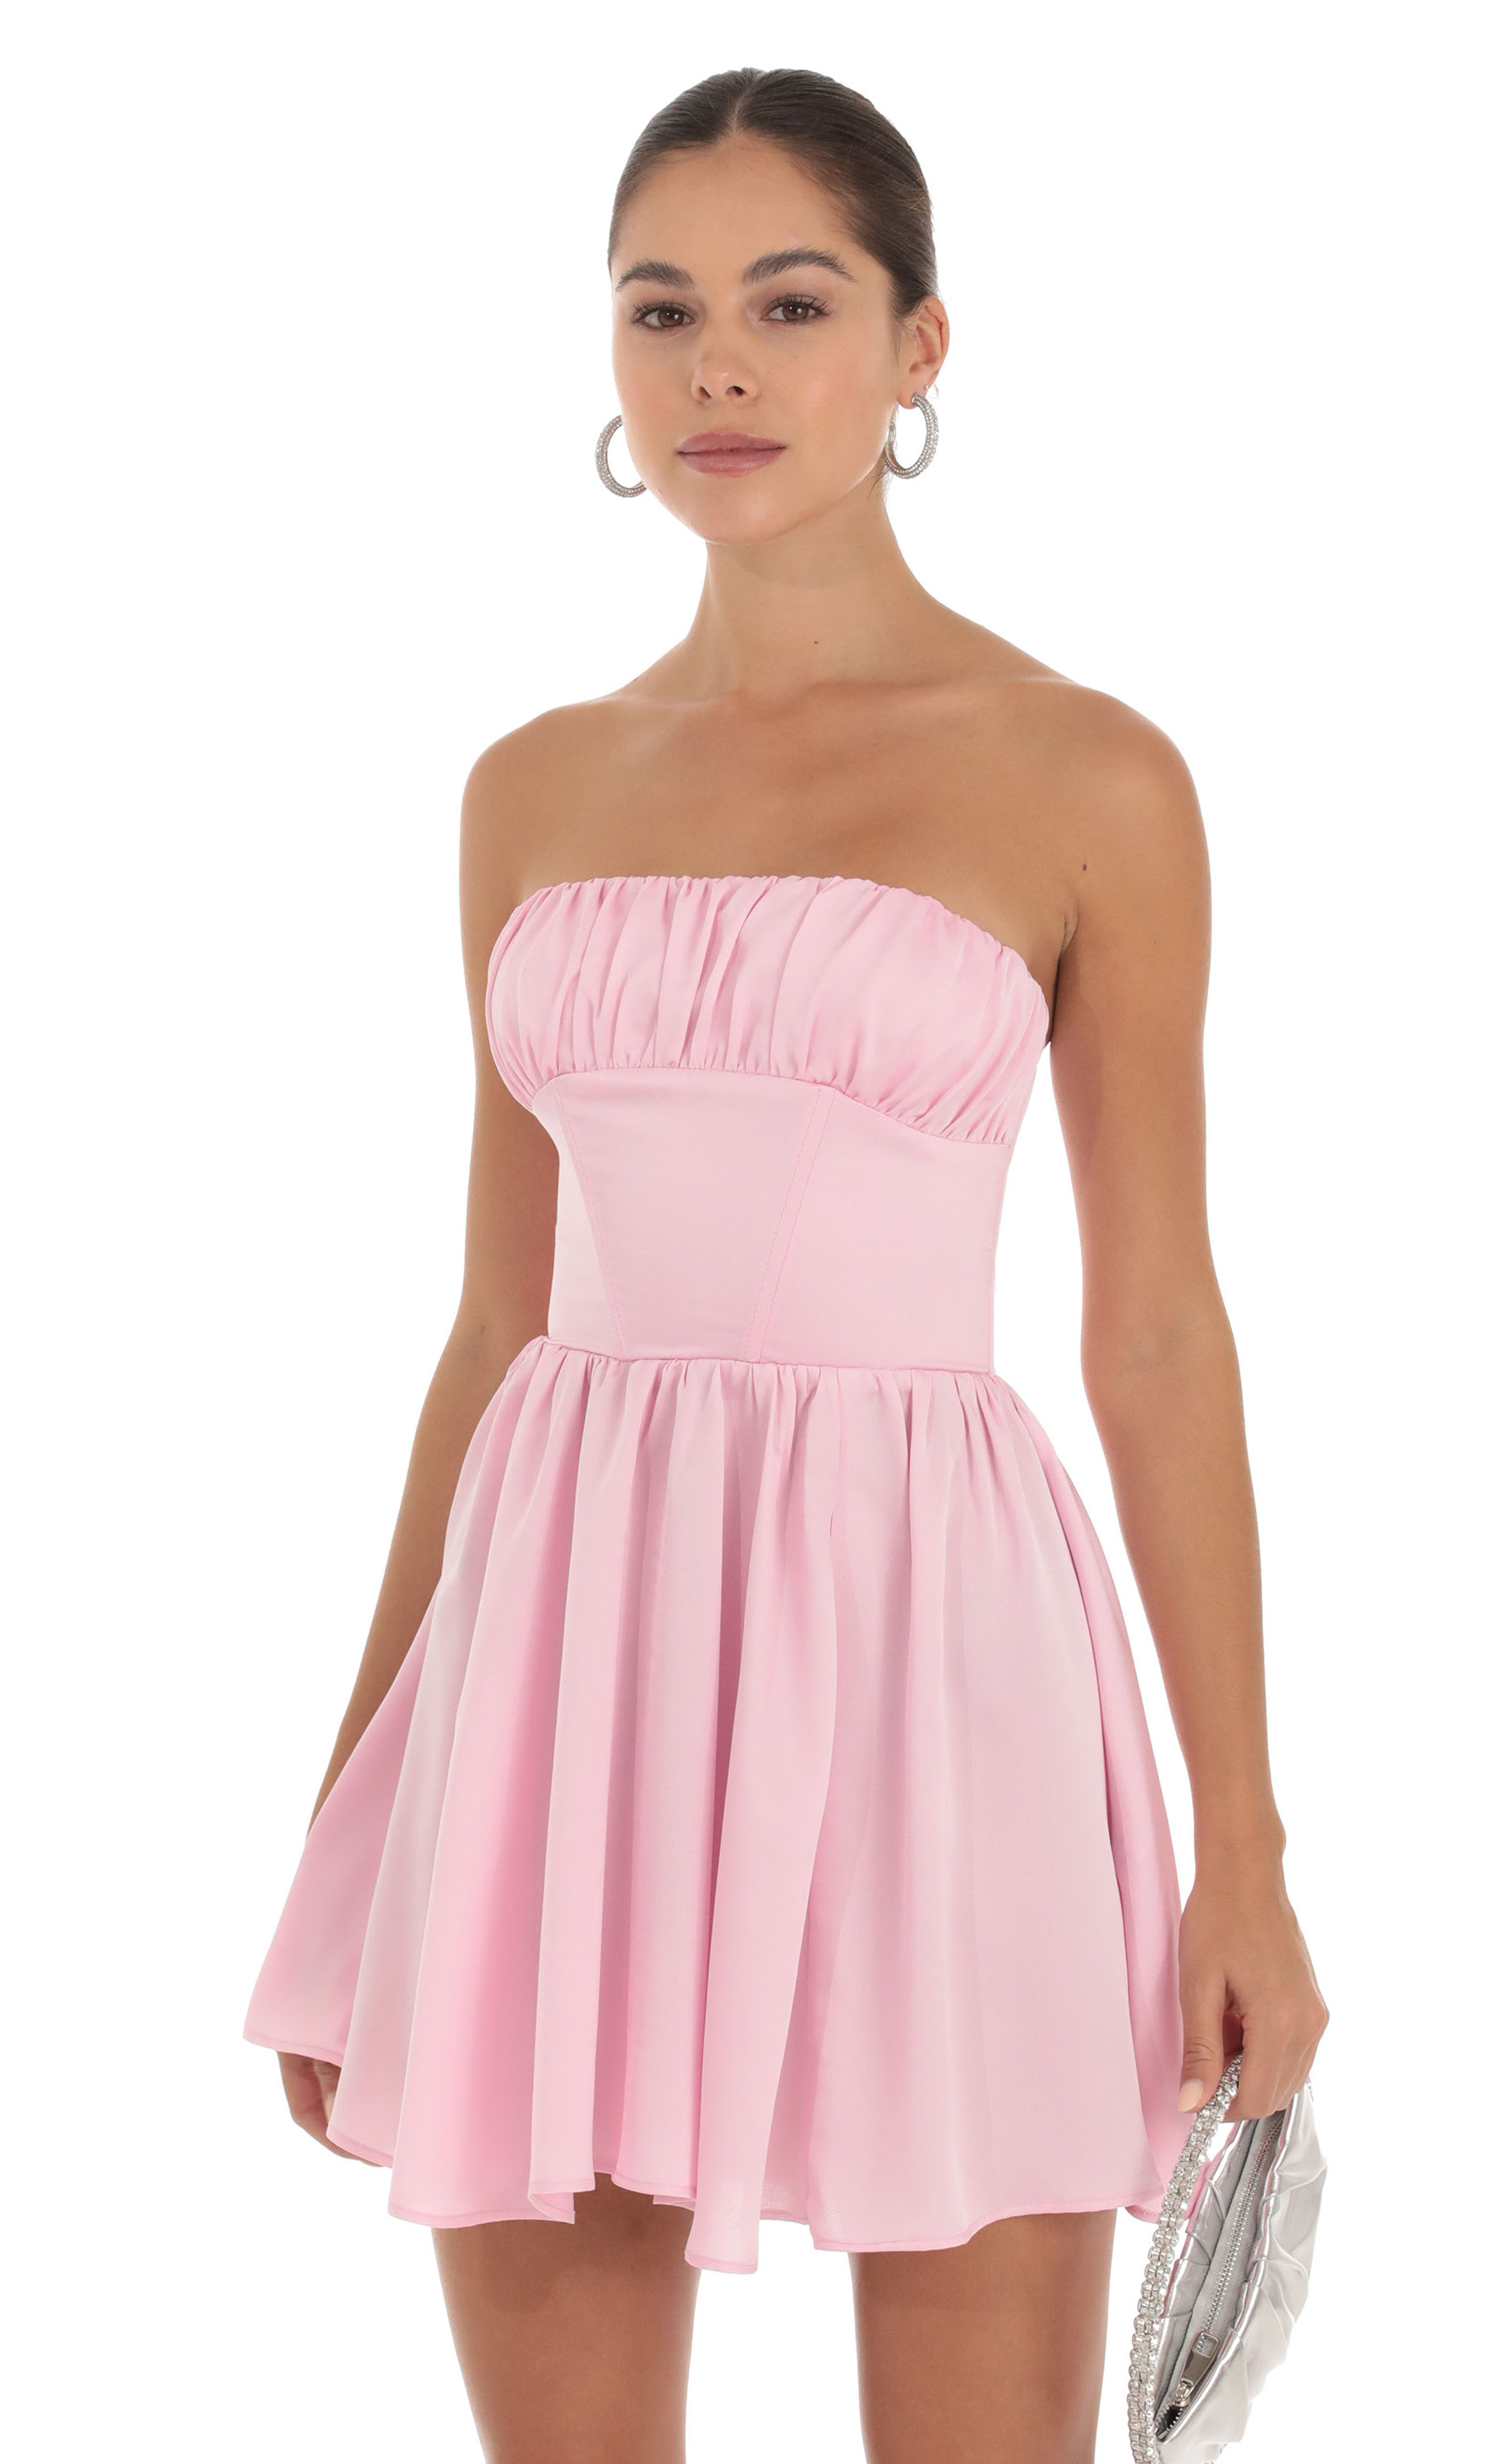 Juno Baby Doll Dress in Pink